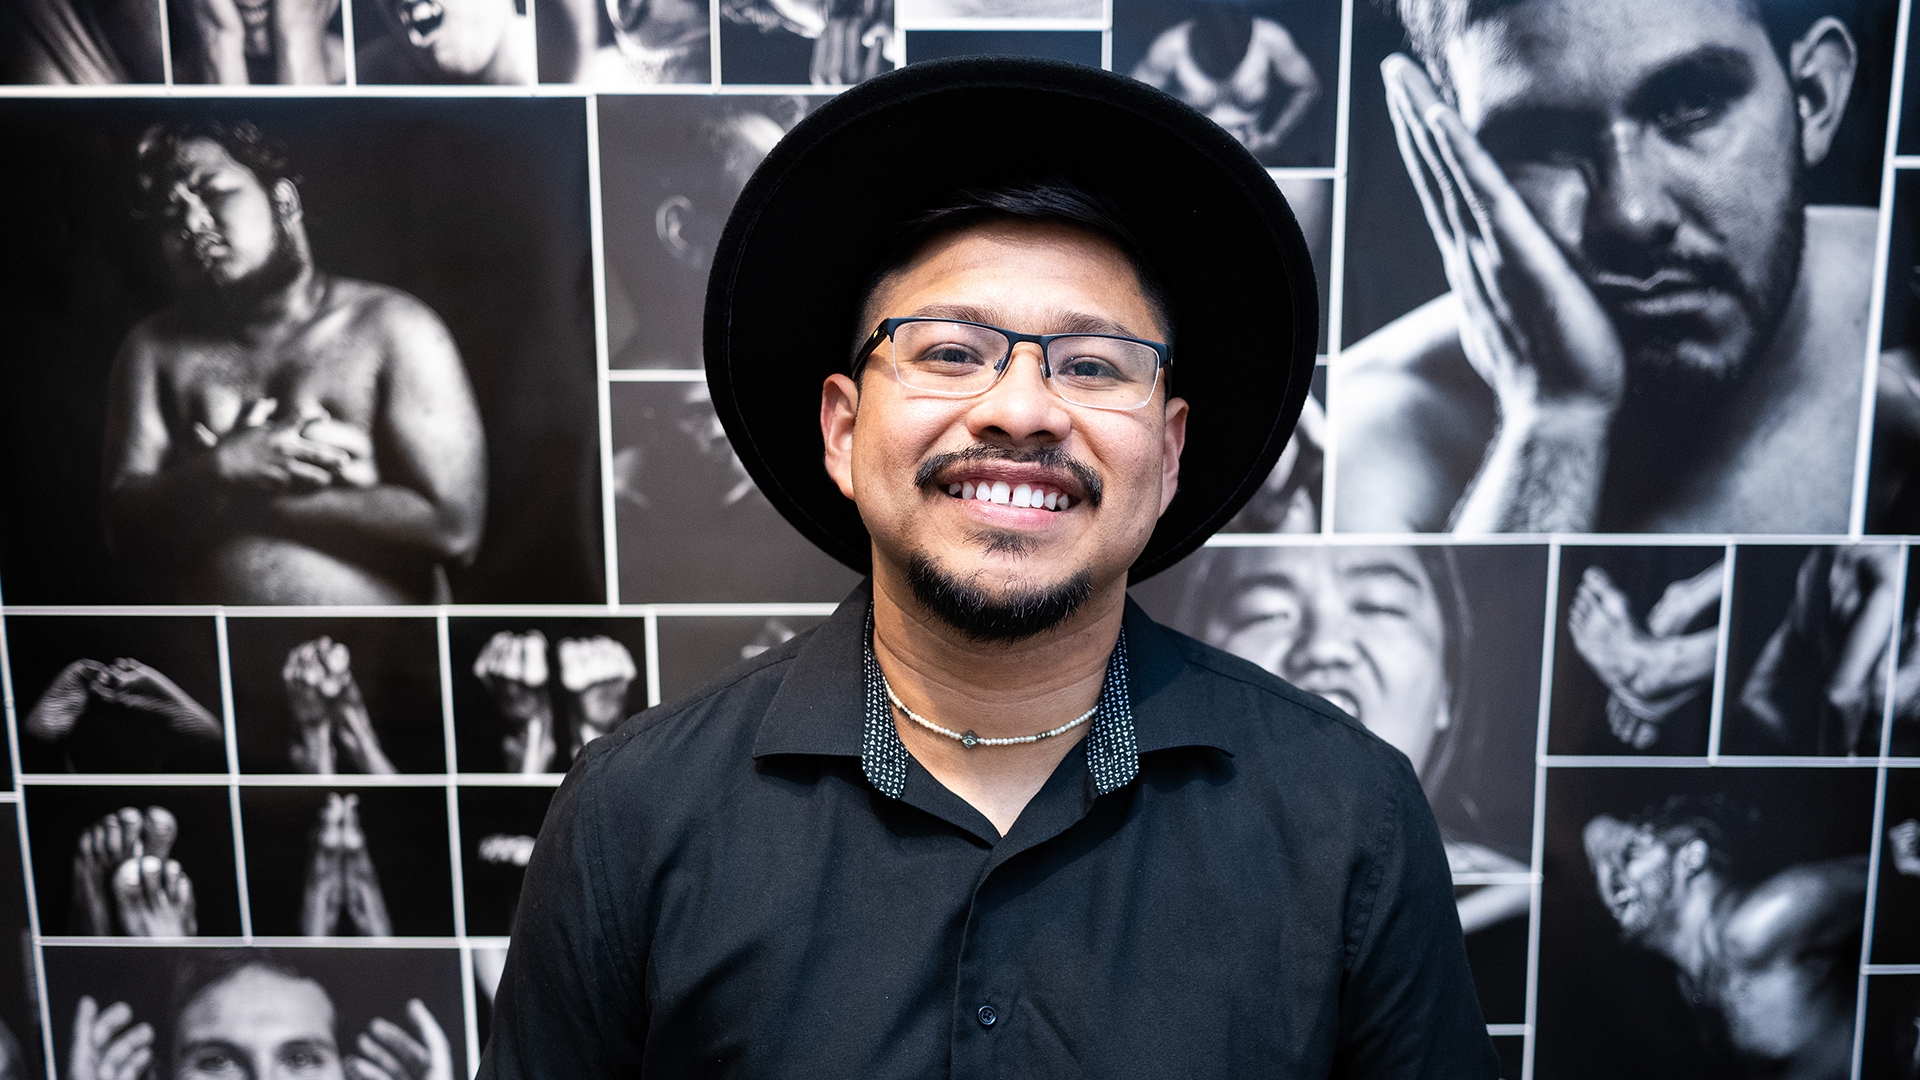 Brandon with a mustache and glasses and wearing a hat smiles and stands in front a wall of black-and-white photos of men is a range of poses that convey vulnerability